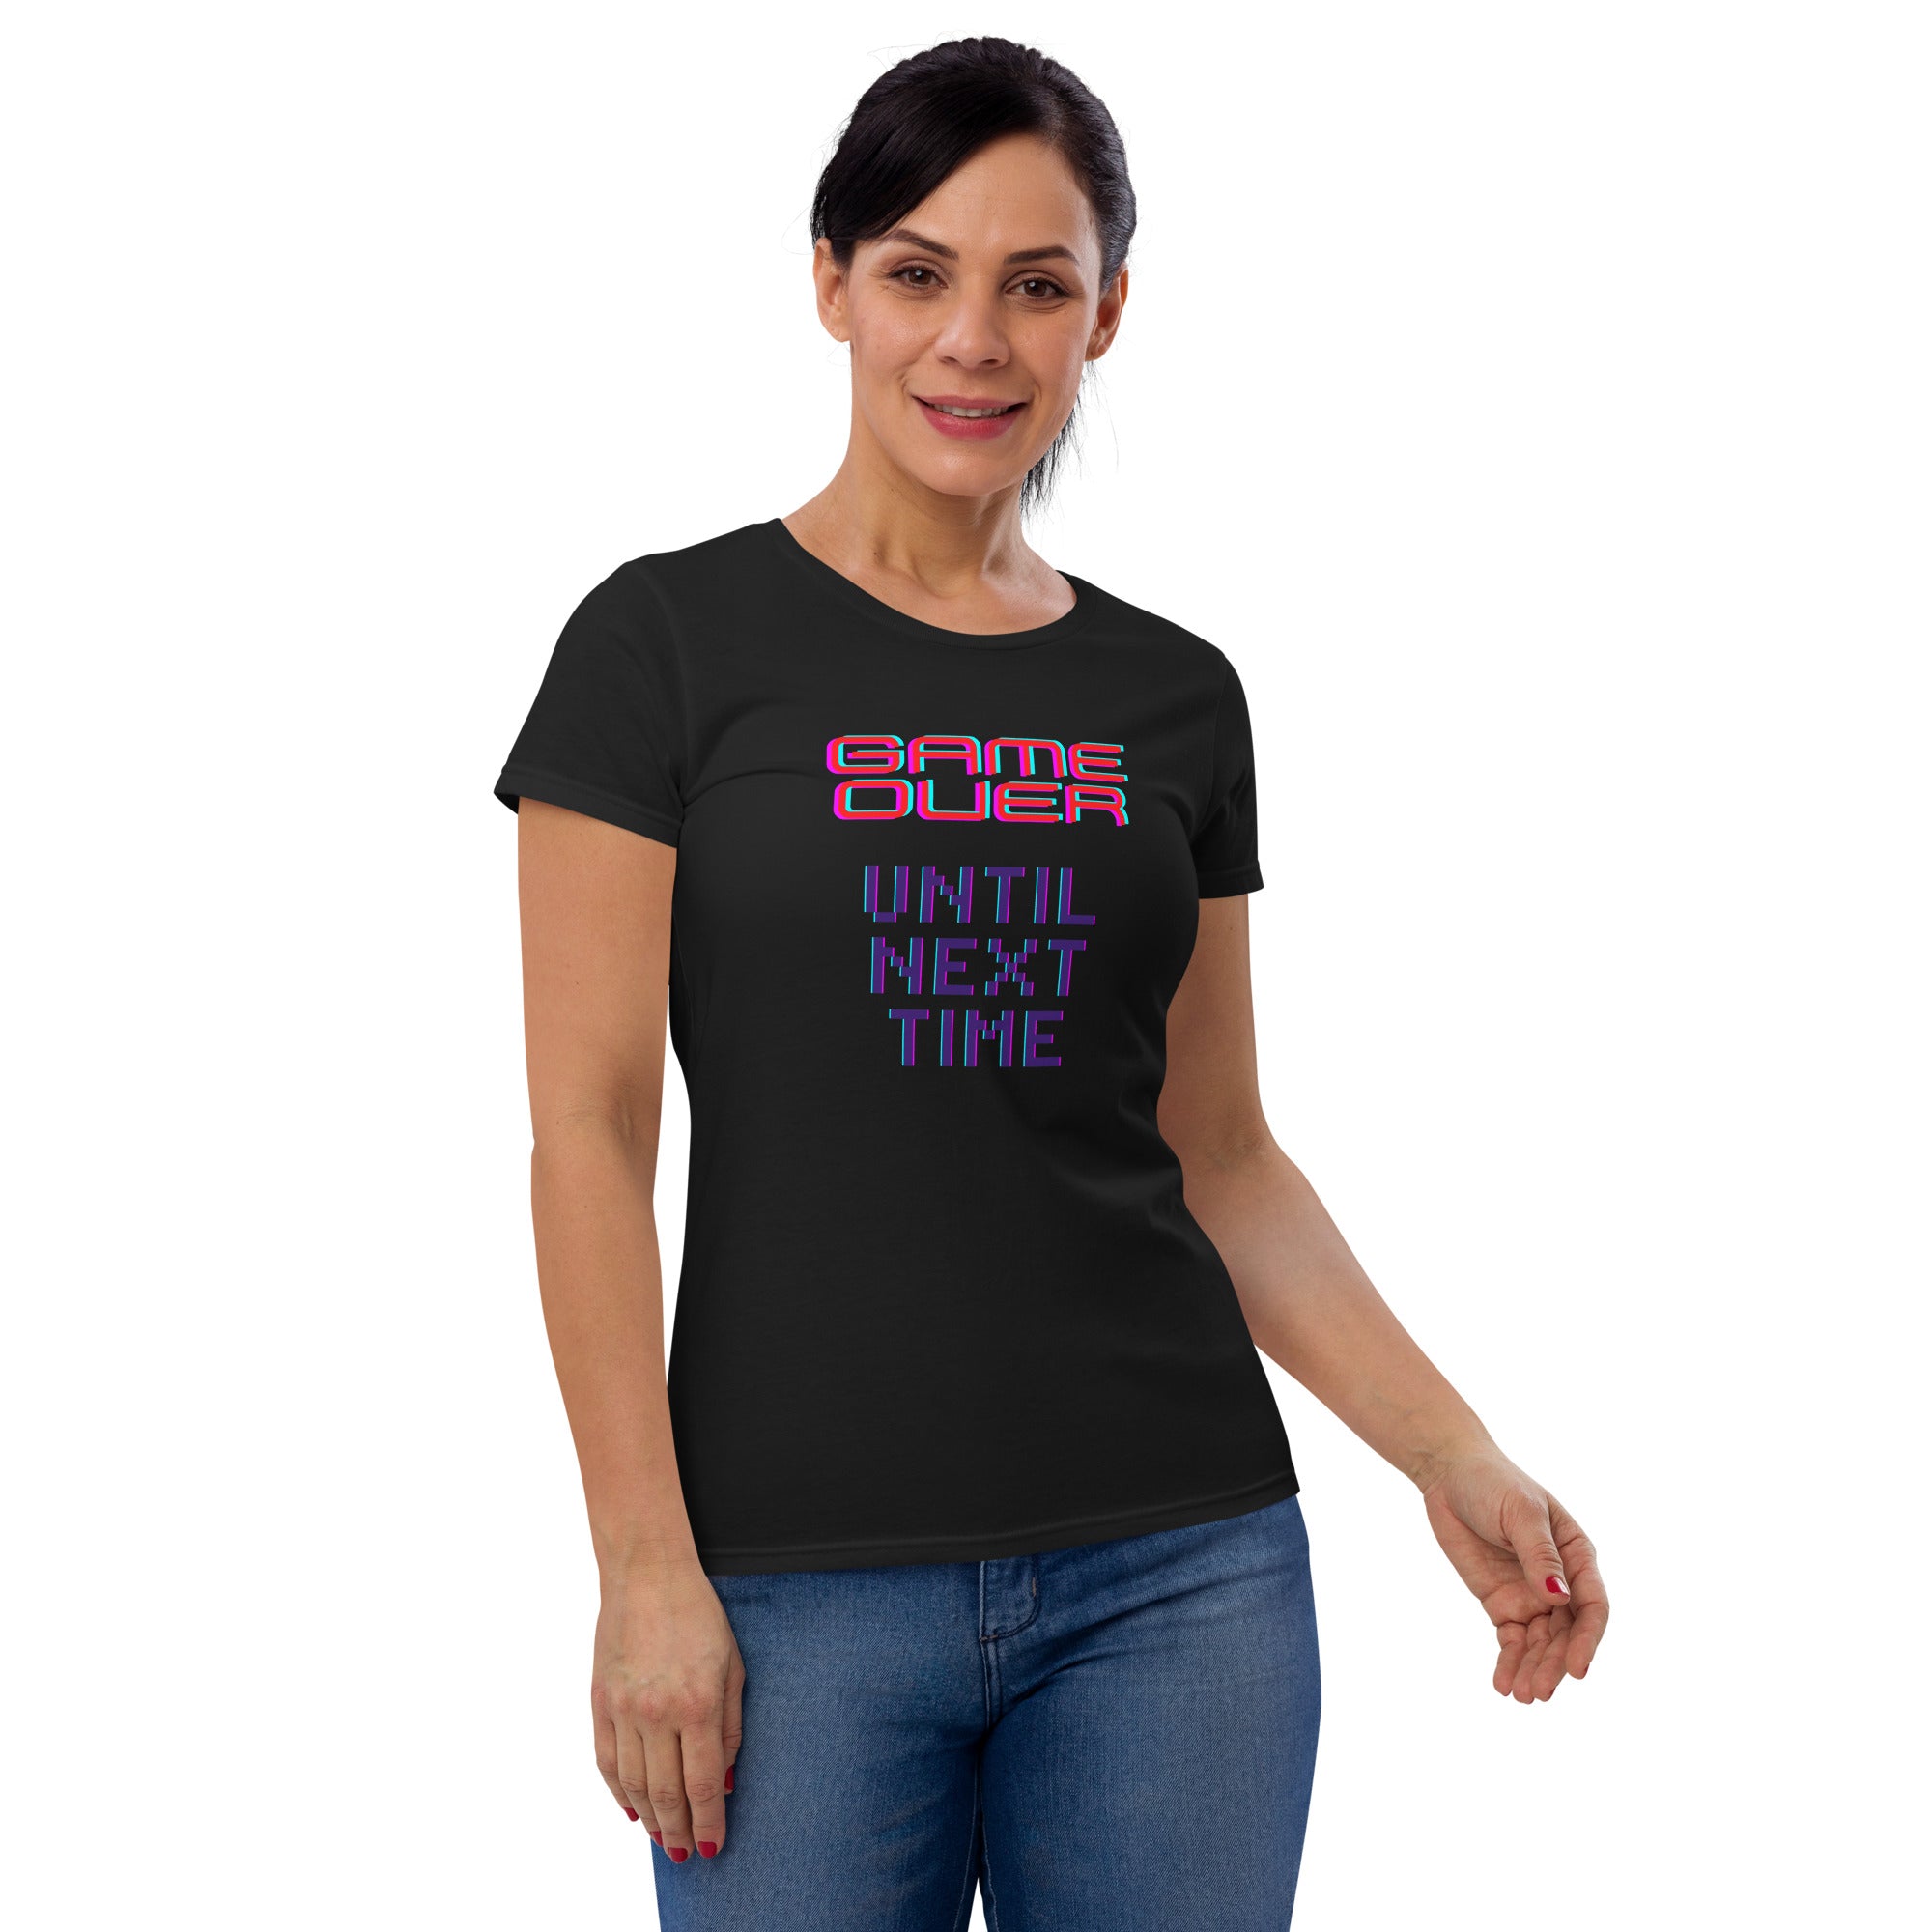 Game Over Until Next Time Women's Fitted T-Shirt